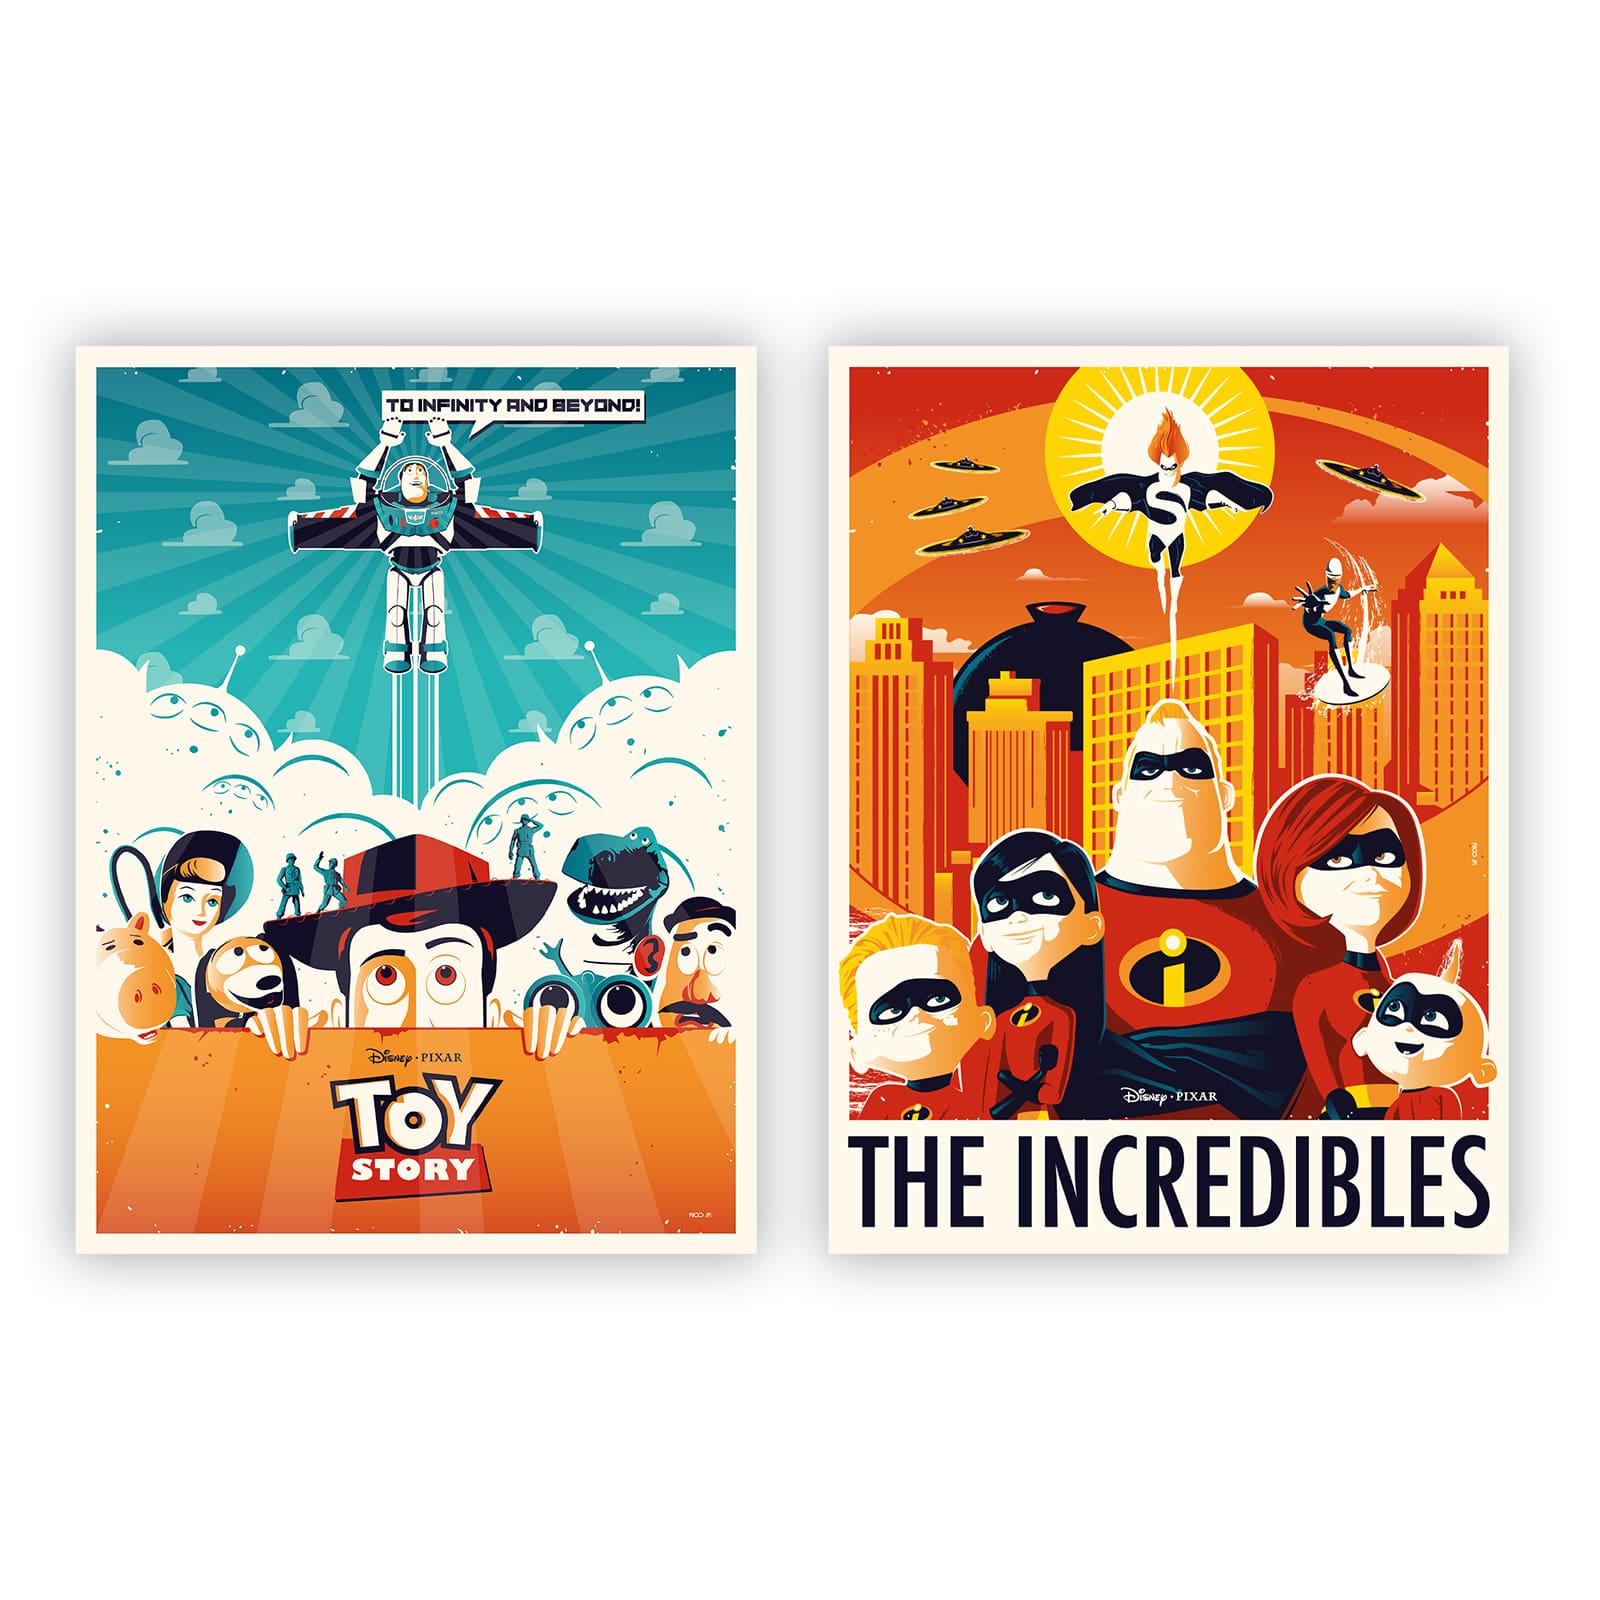 Toy Story x The Incredibles | Toy Story, The Incredibles Poster | Rico Jr. | PopCultArt 